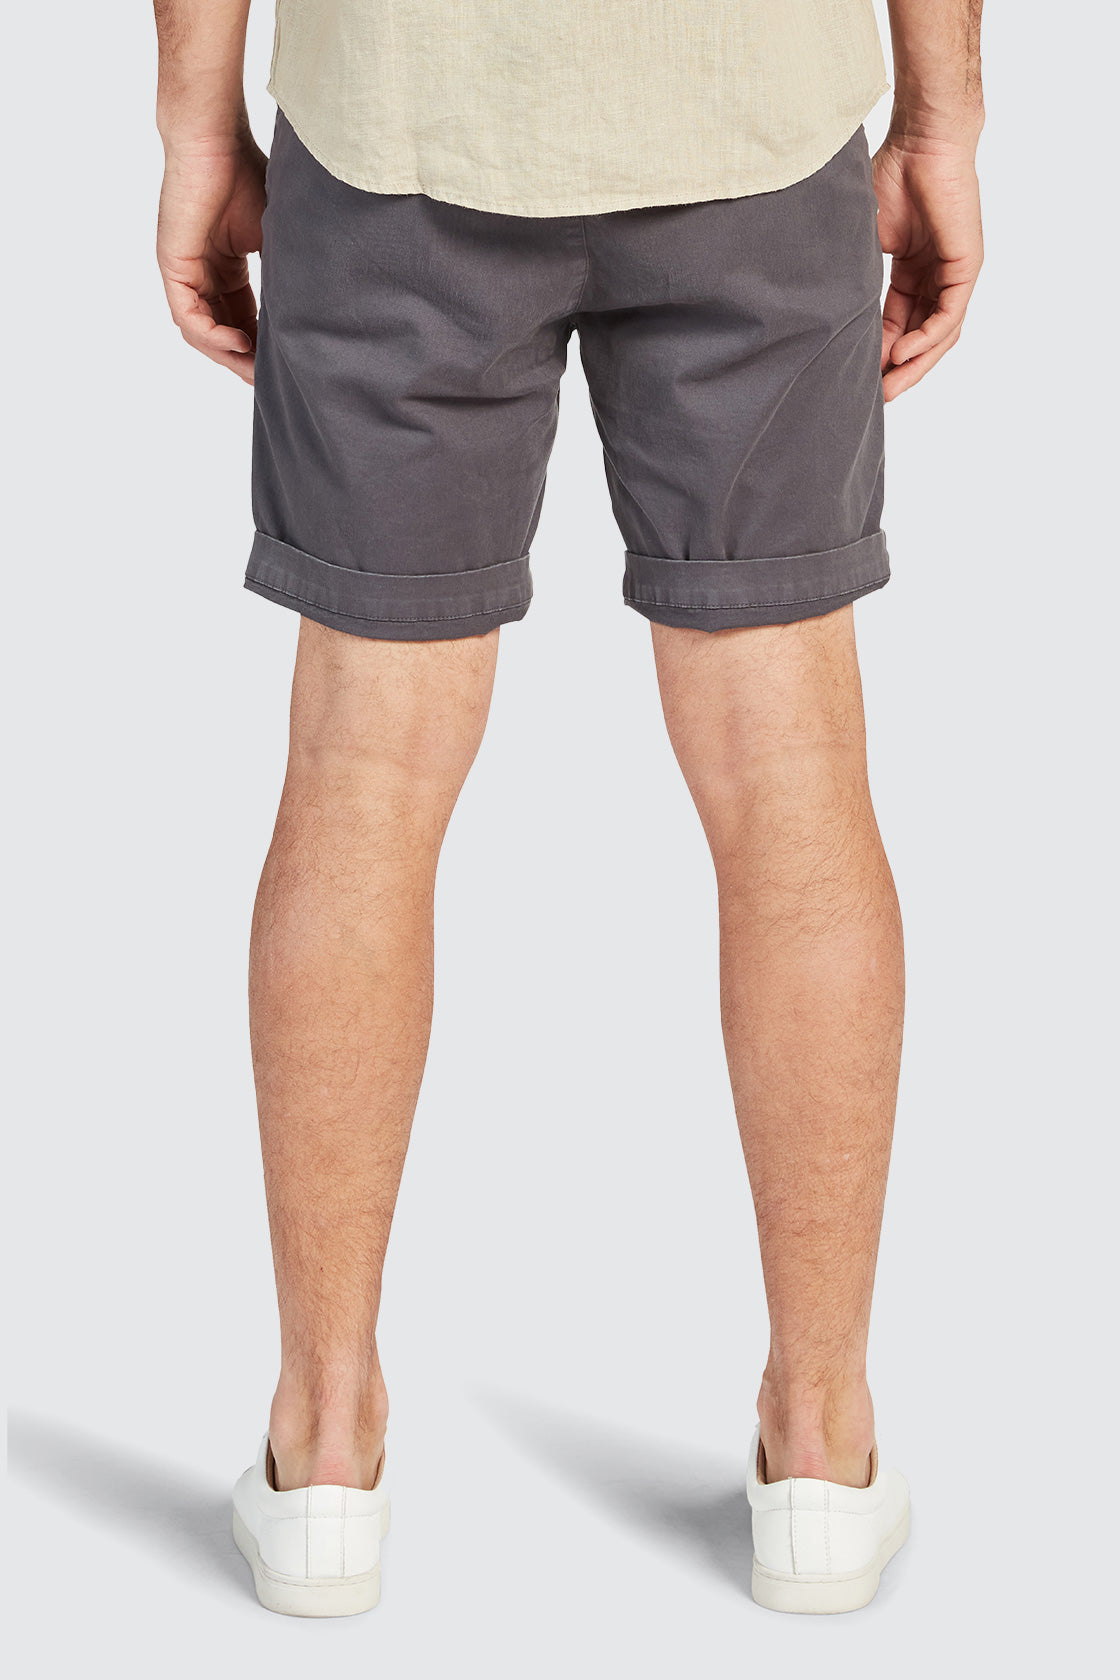 The Academy Brand Cooper Chino Short Charcoal